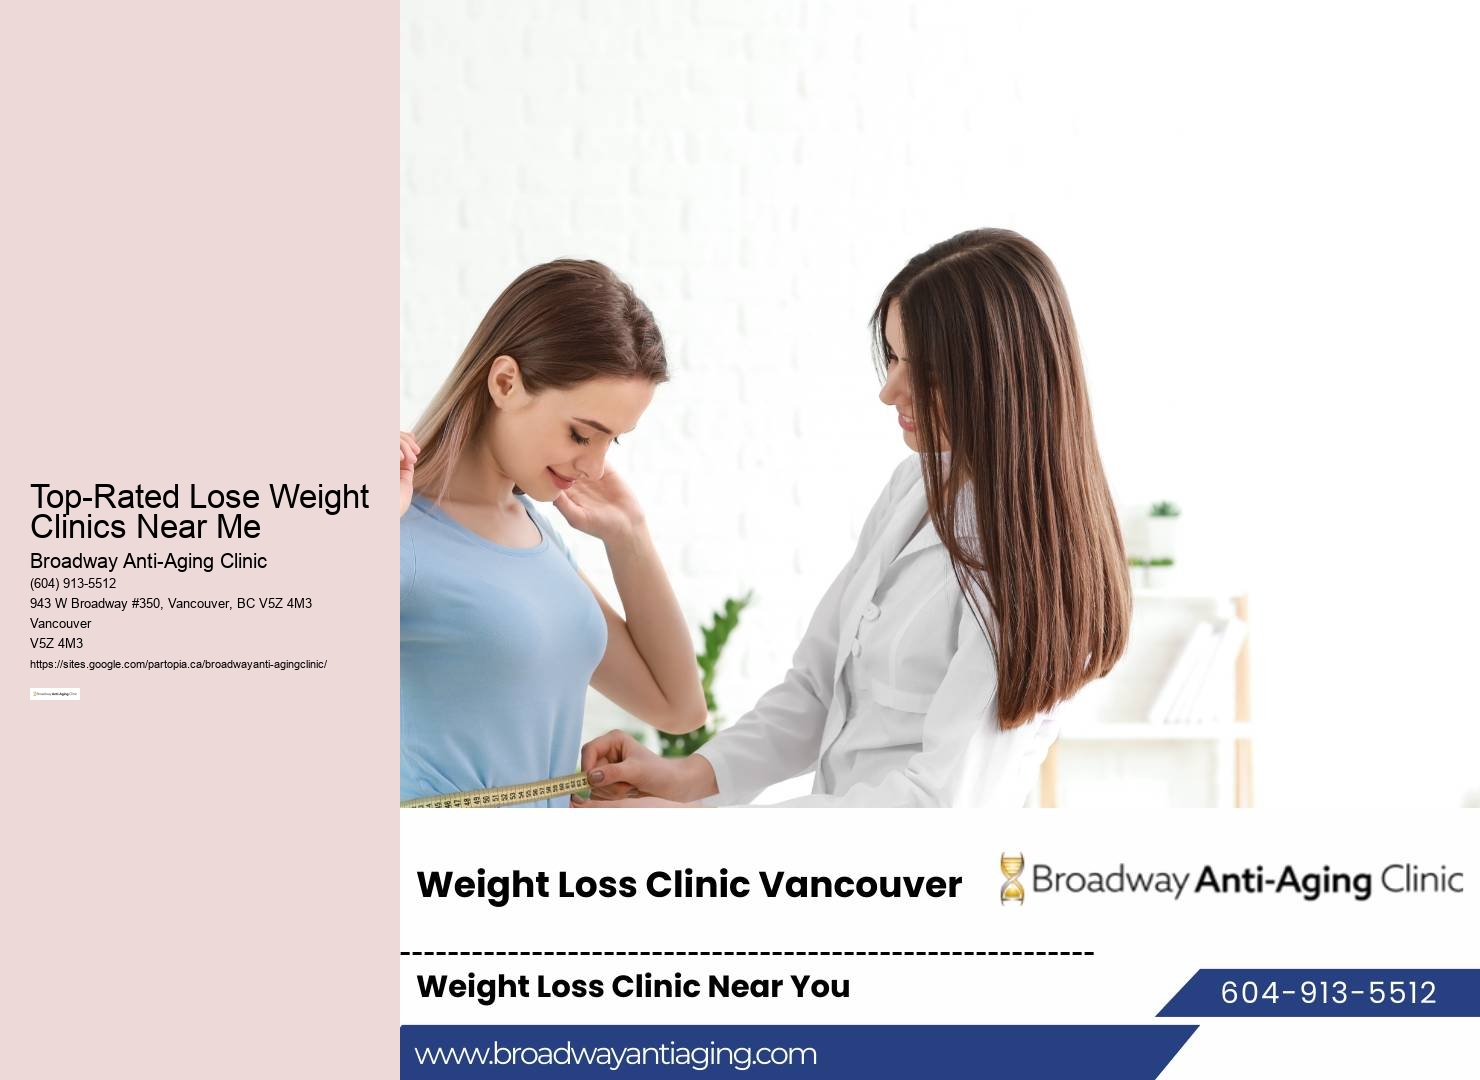 Weight loss clinic near me now